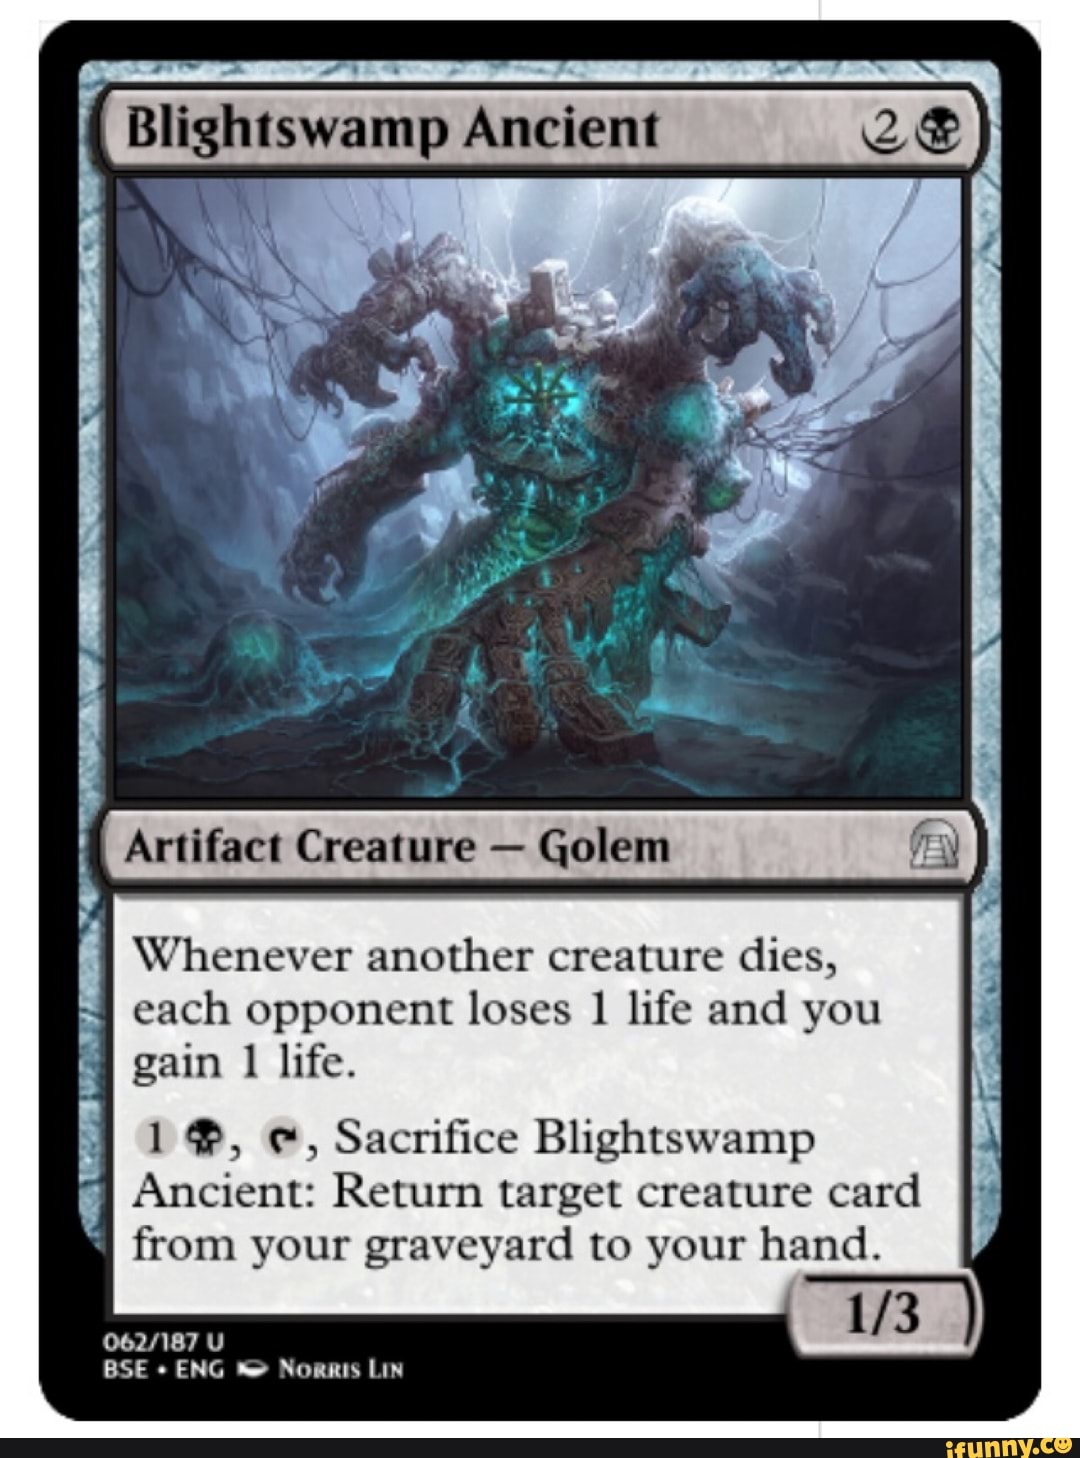 Whenever another creature dies, each opponent loses 1 life and you gain